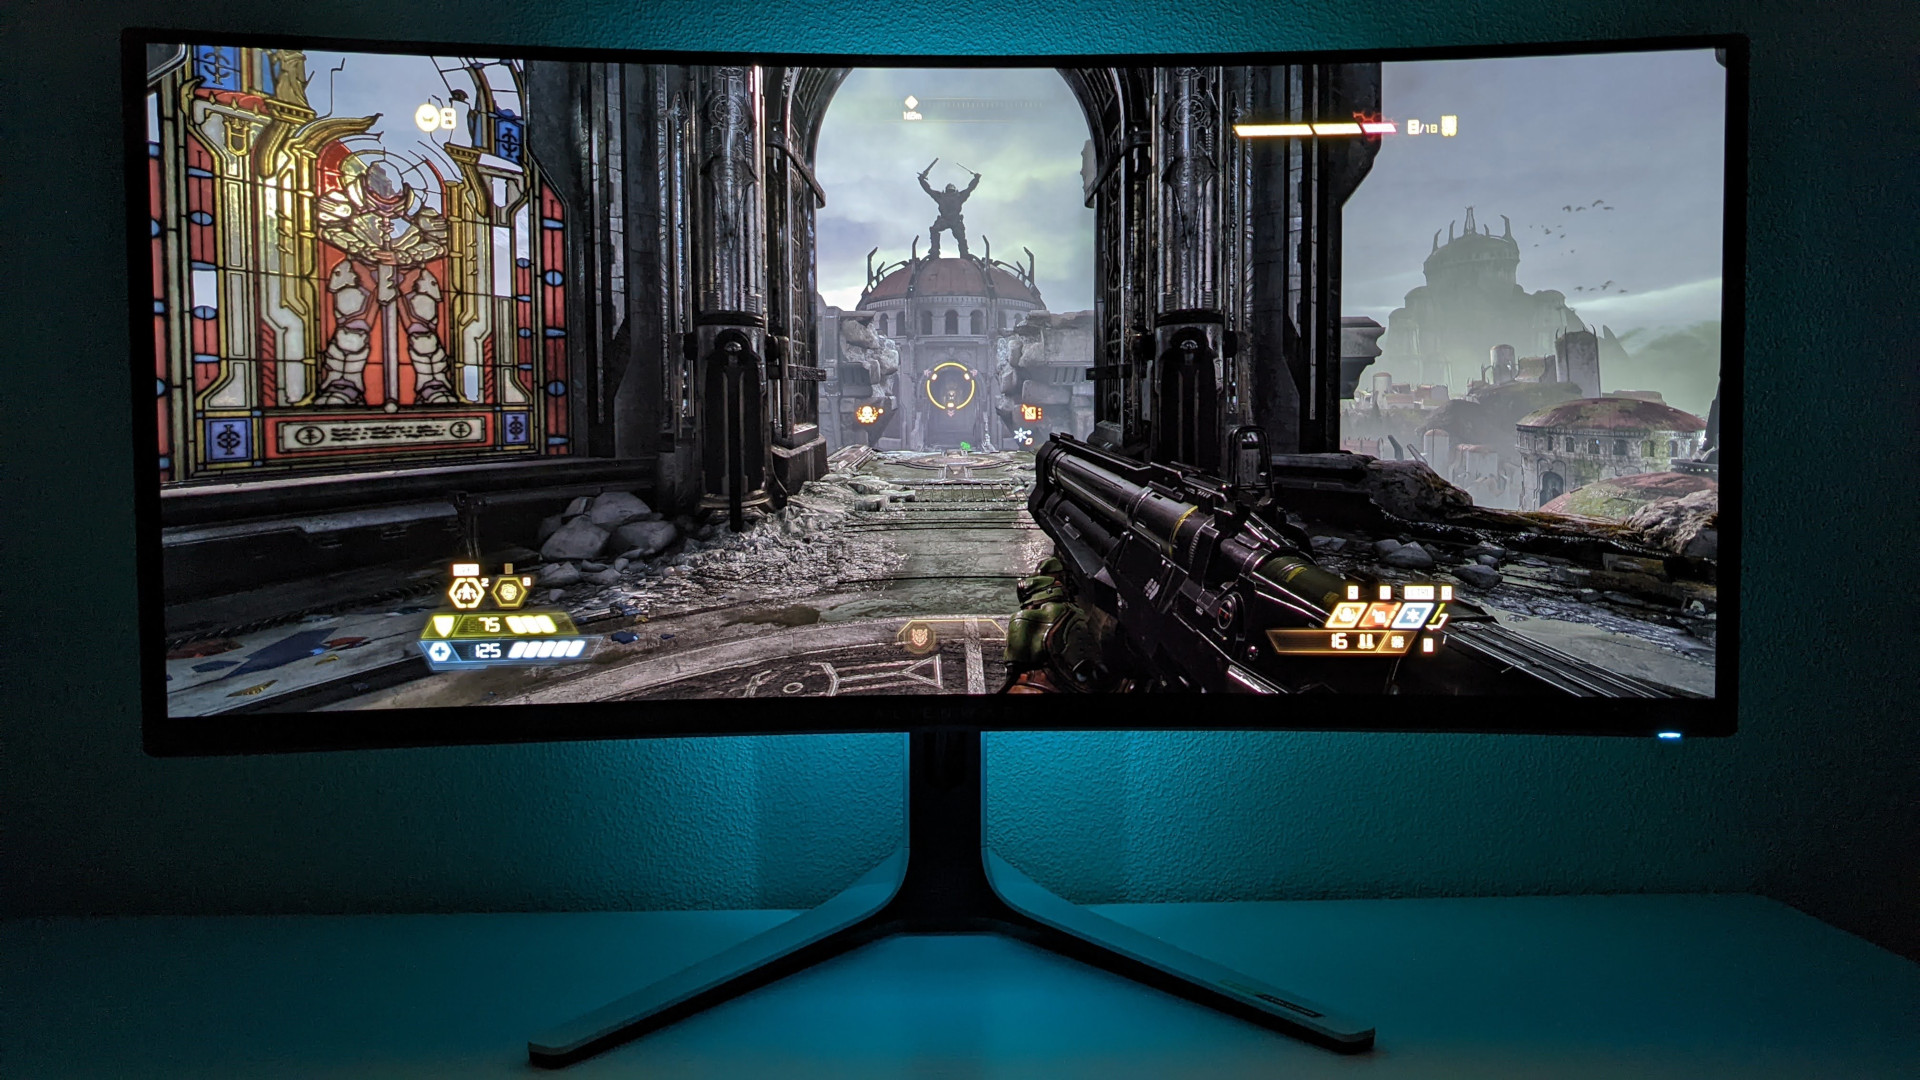 Alienware AW3423DW Review: This OLED Gaming Monitor Is Out of This